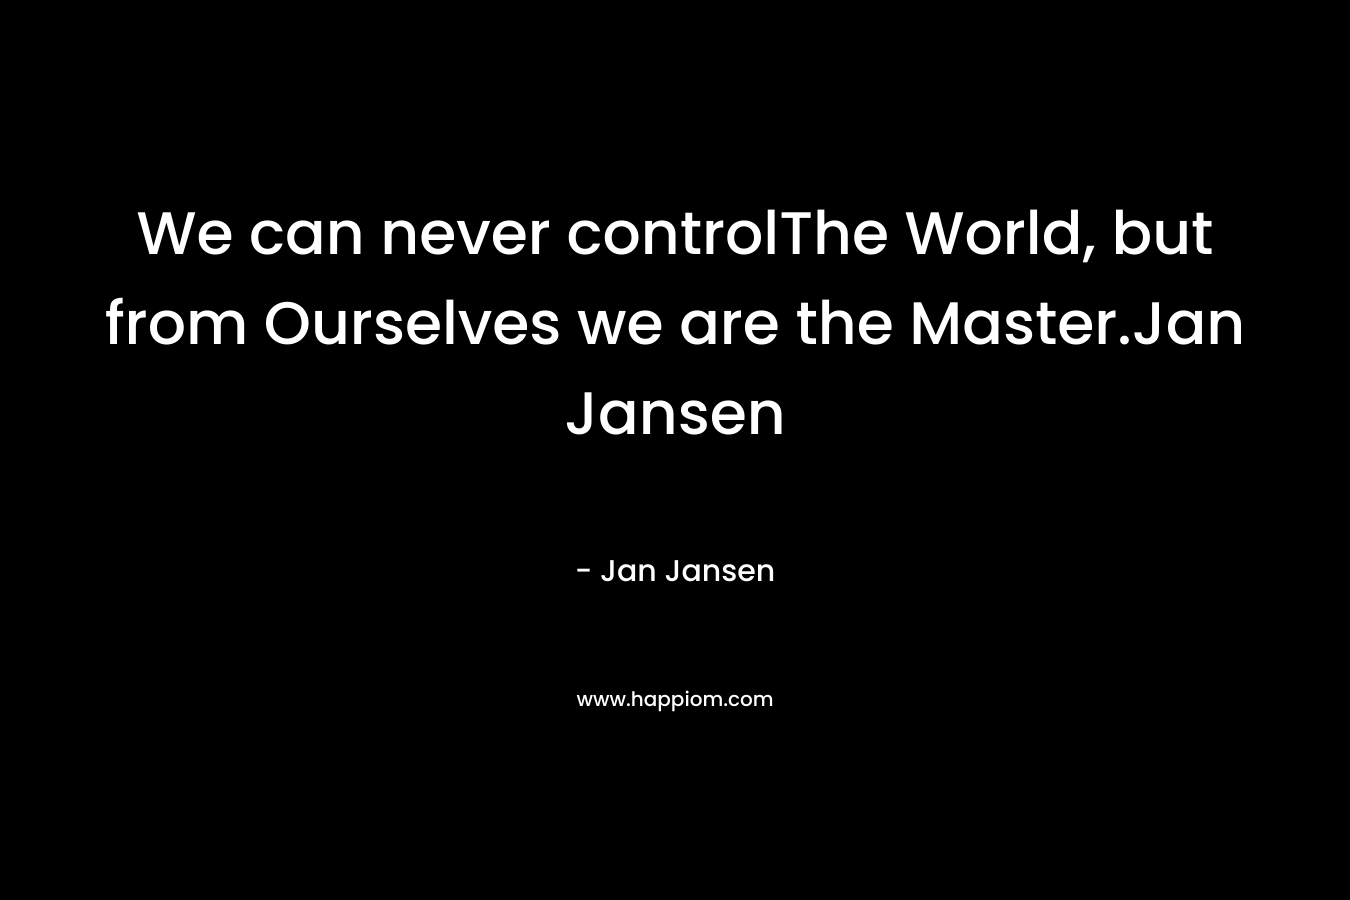 We can never controlThe World, but from Ourselves we are the Master.Jan Jansen – Jan Jansen